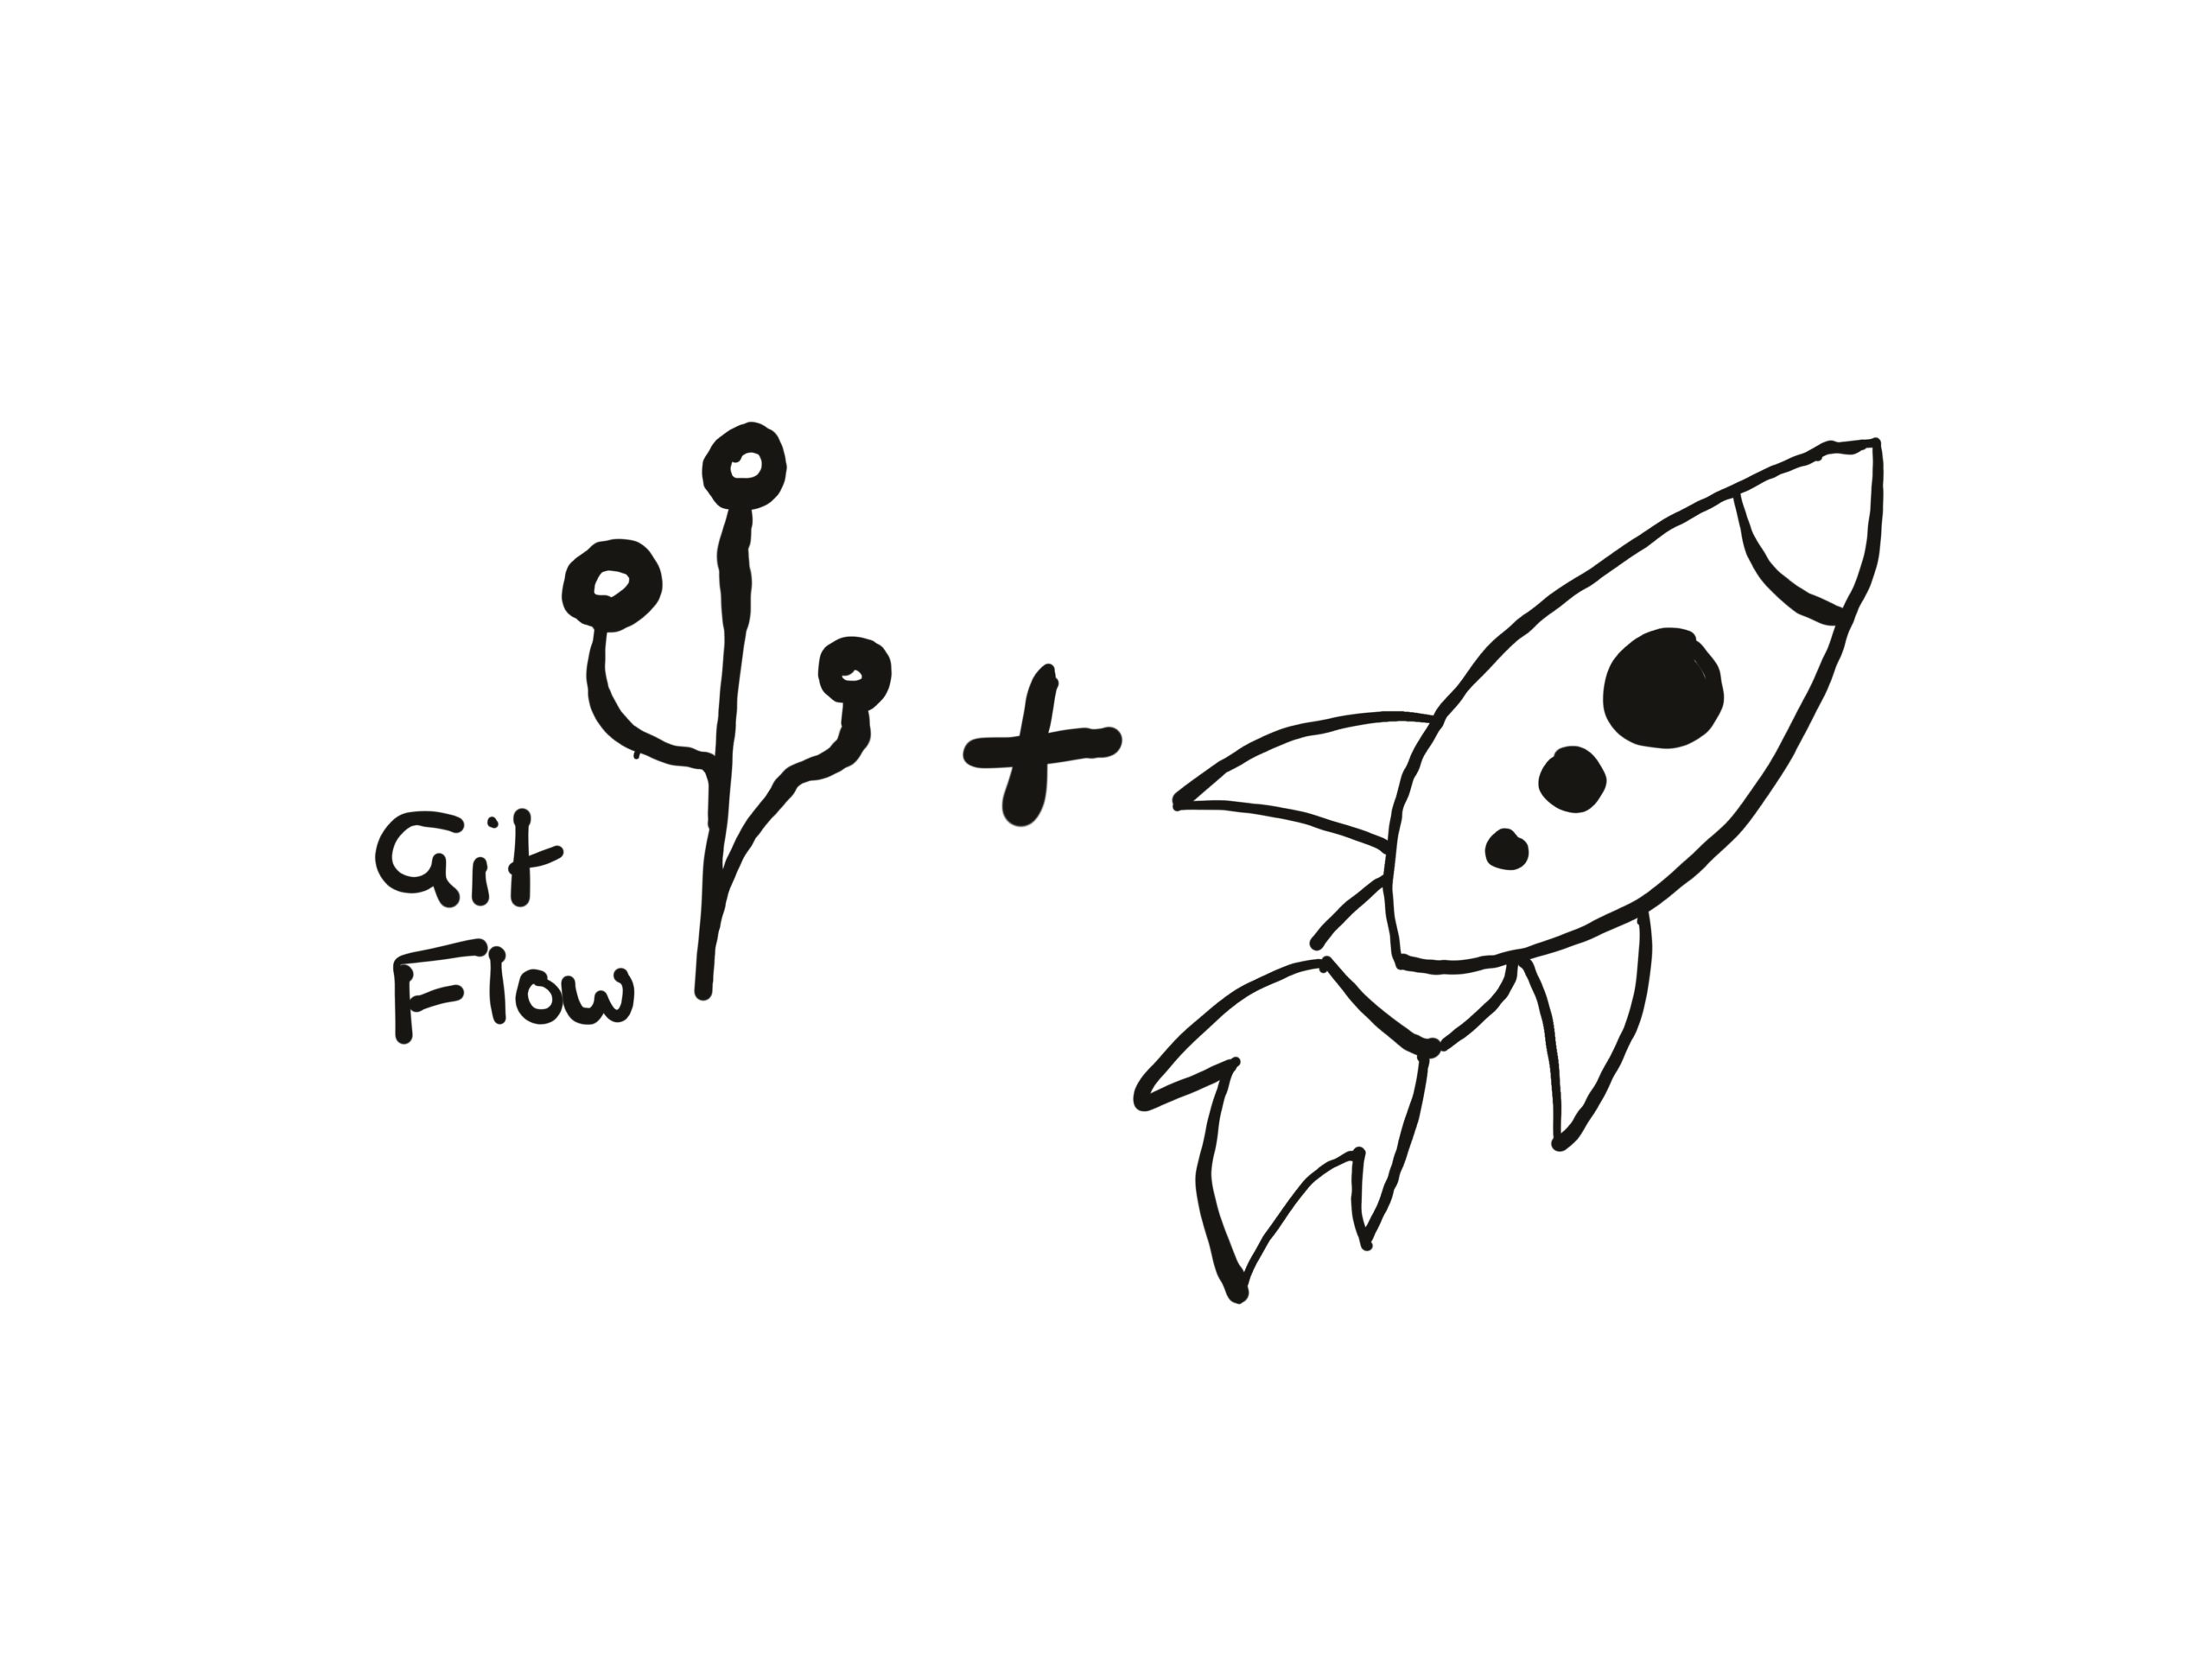 The text “GitFlow” alongside a git branching icon and a rocketship to represent deployment.